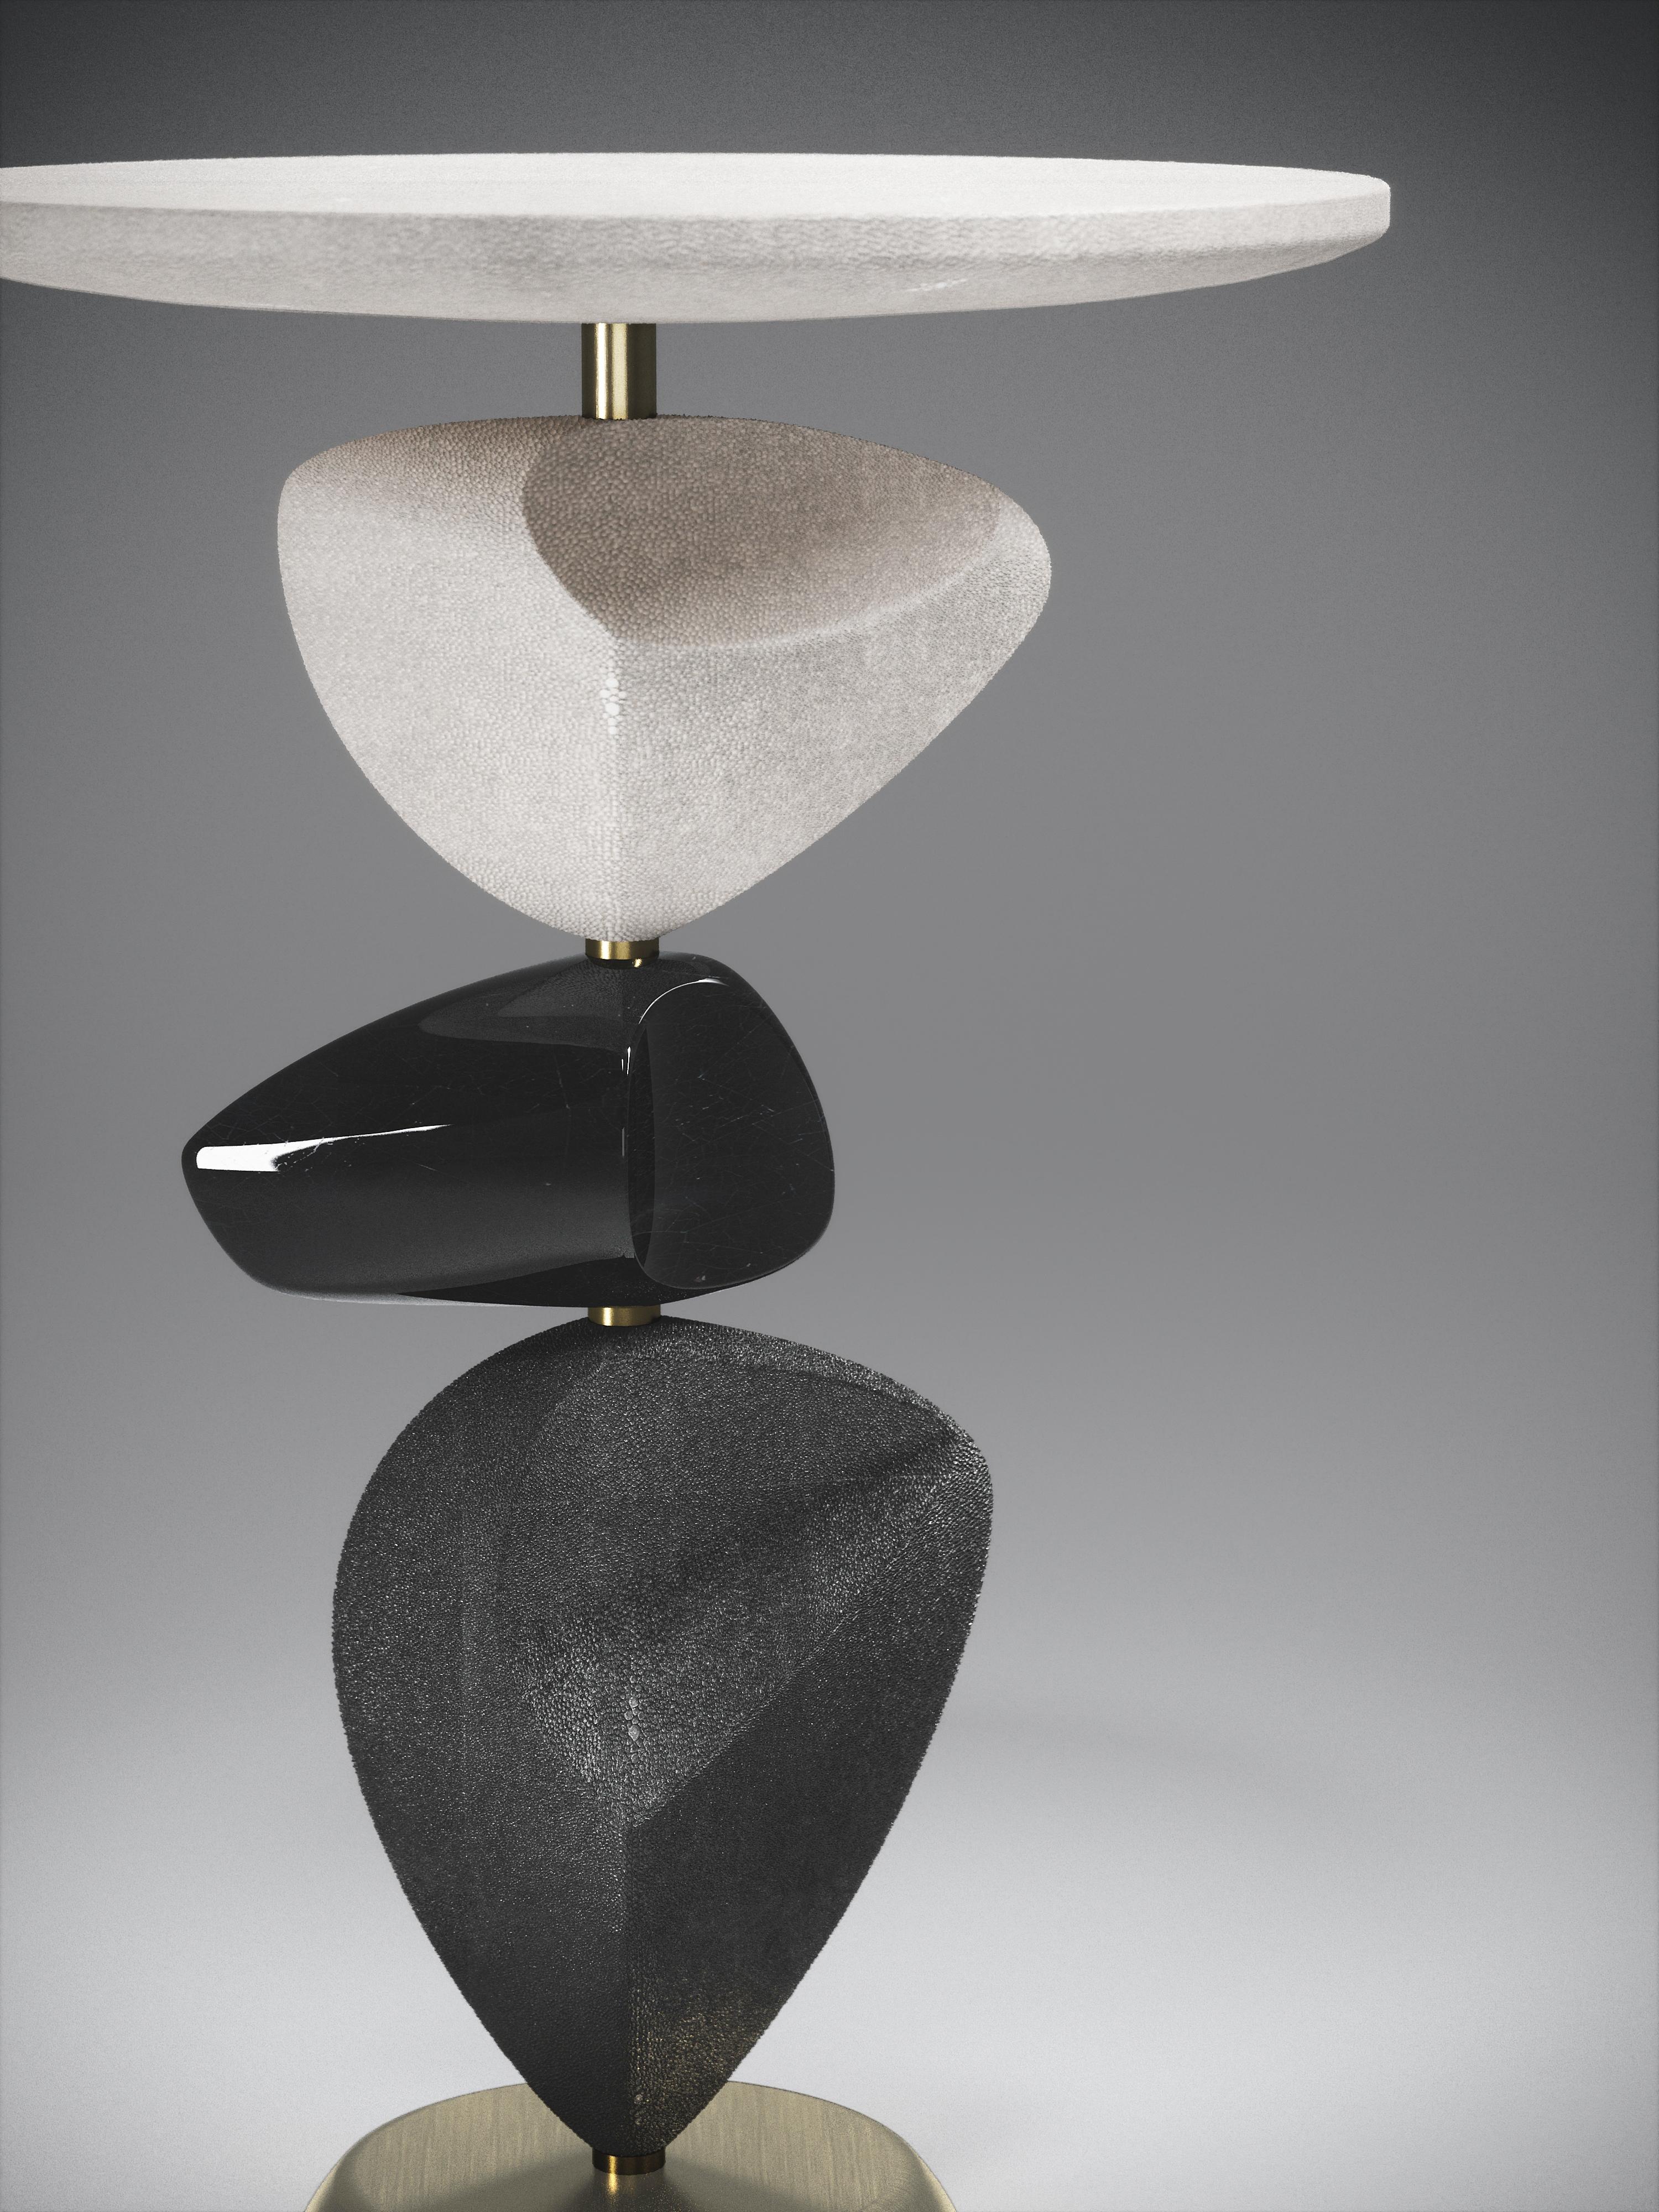 The Cosmo Moon side table by Kifu Paris is a whimsical and sculptural piece, inlaid in cream shagreen, black pen shell, coal black shagreen and bronze-patina brass. This piece is a sister to the original Cosmo Side Table by Kifu Paris, see images at